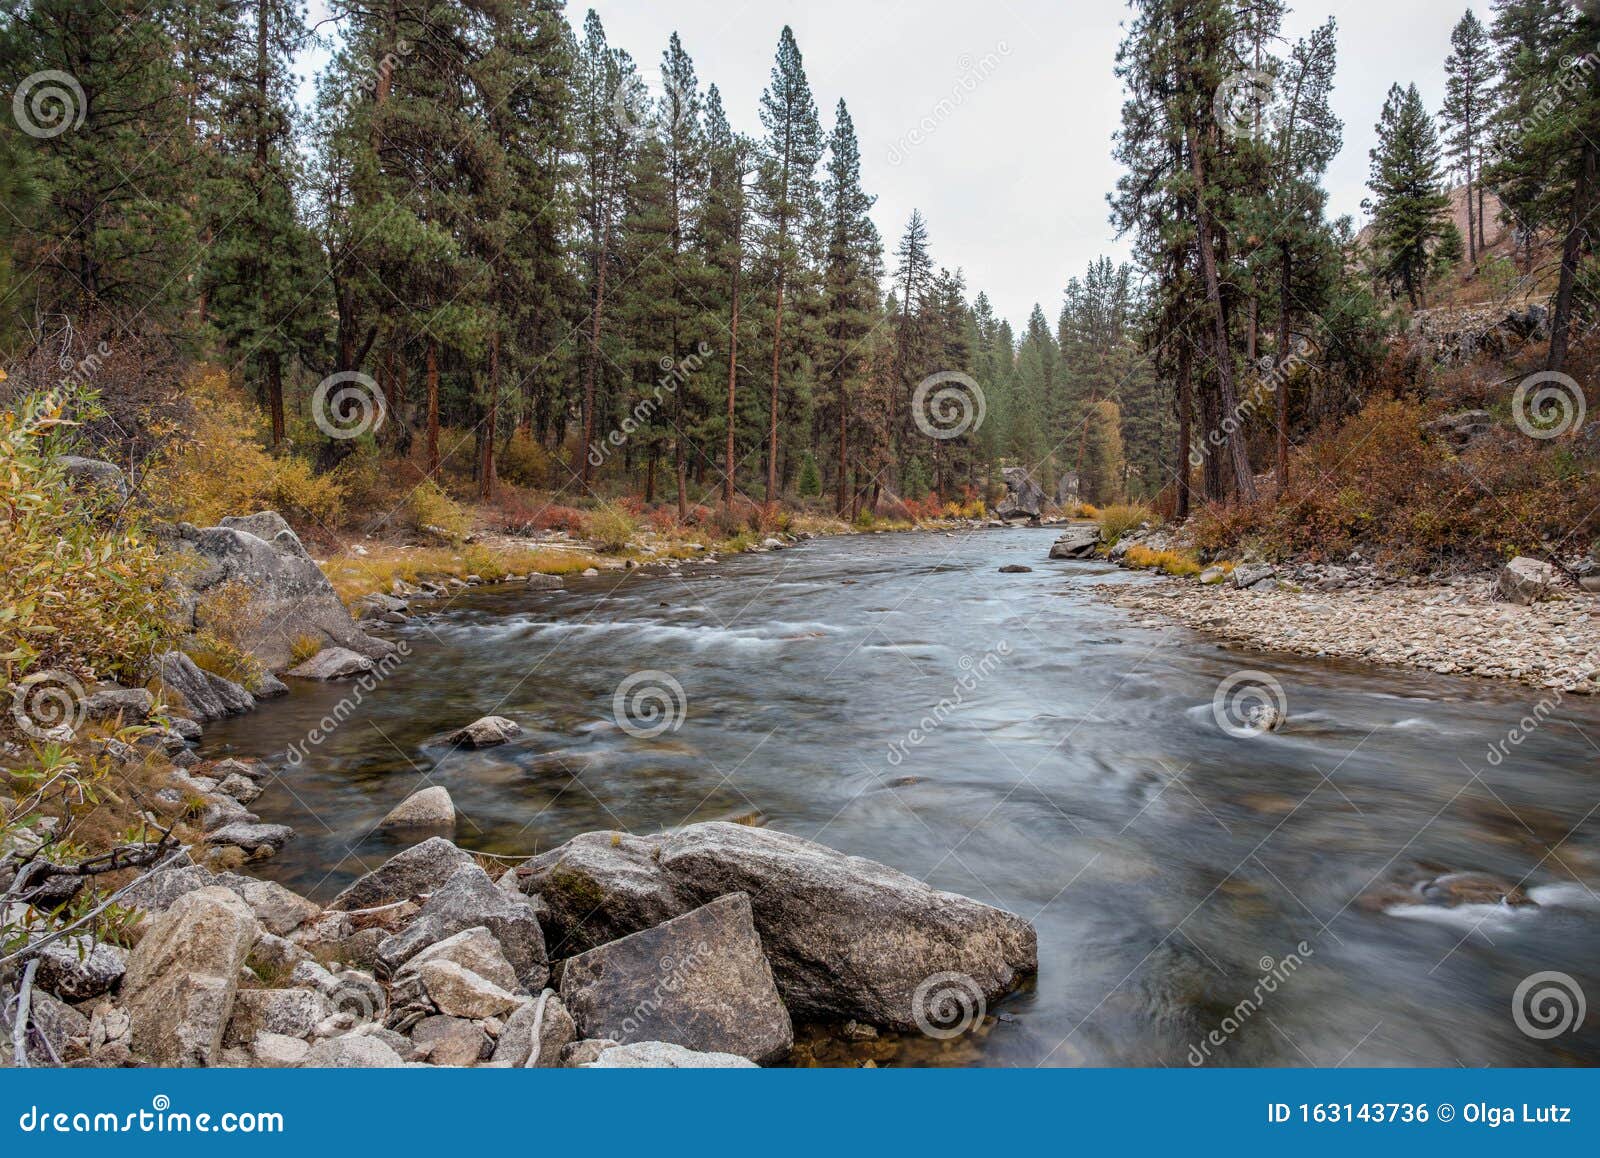 landscape of north fork of boise river in idaho in the fall